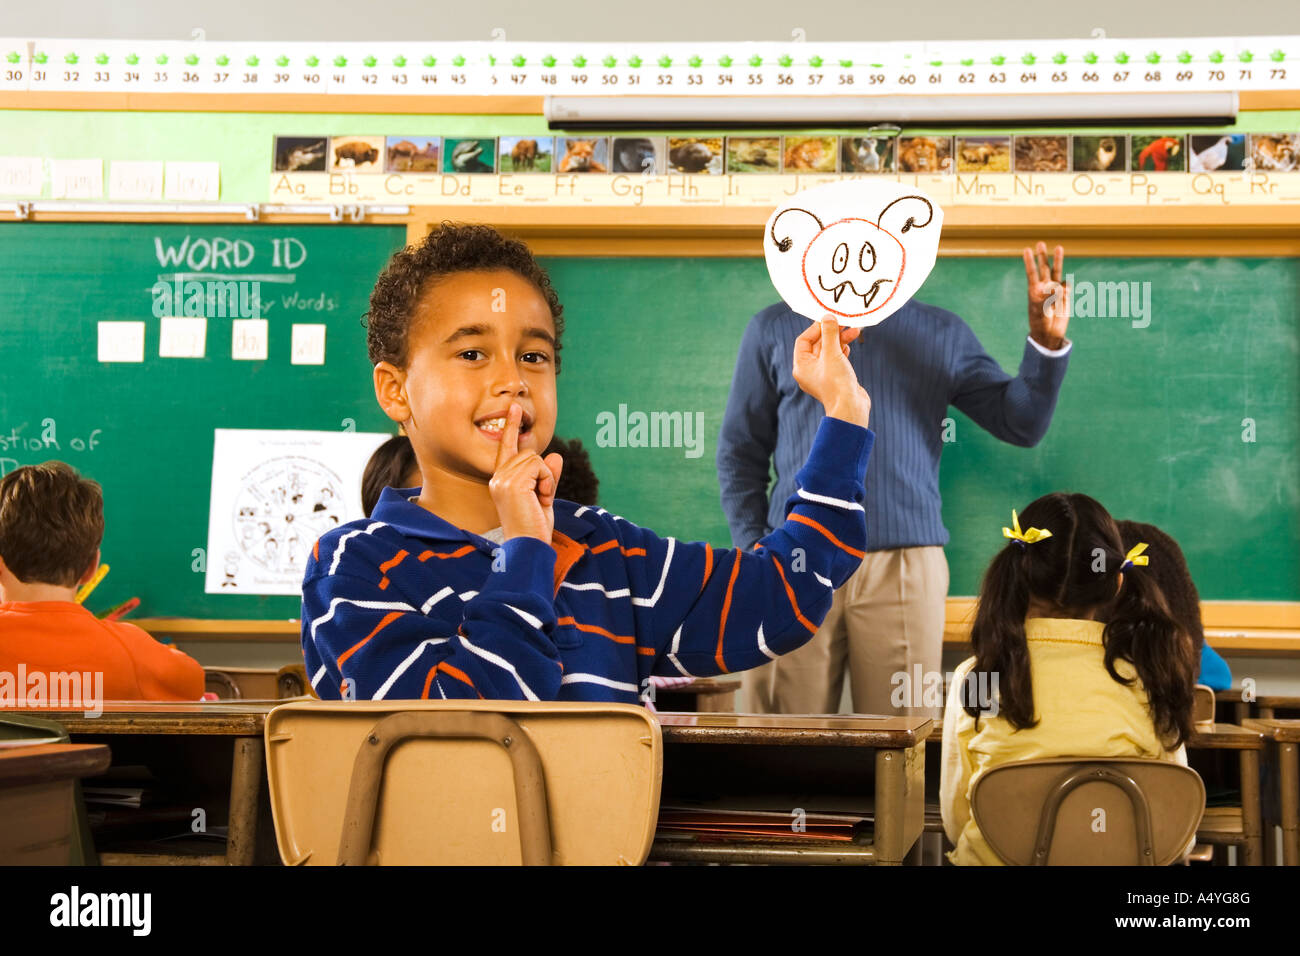 Boy holding drawing over teacher’s face Stock Photo